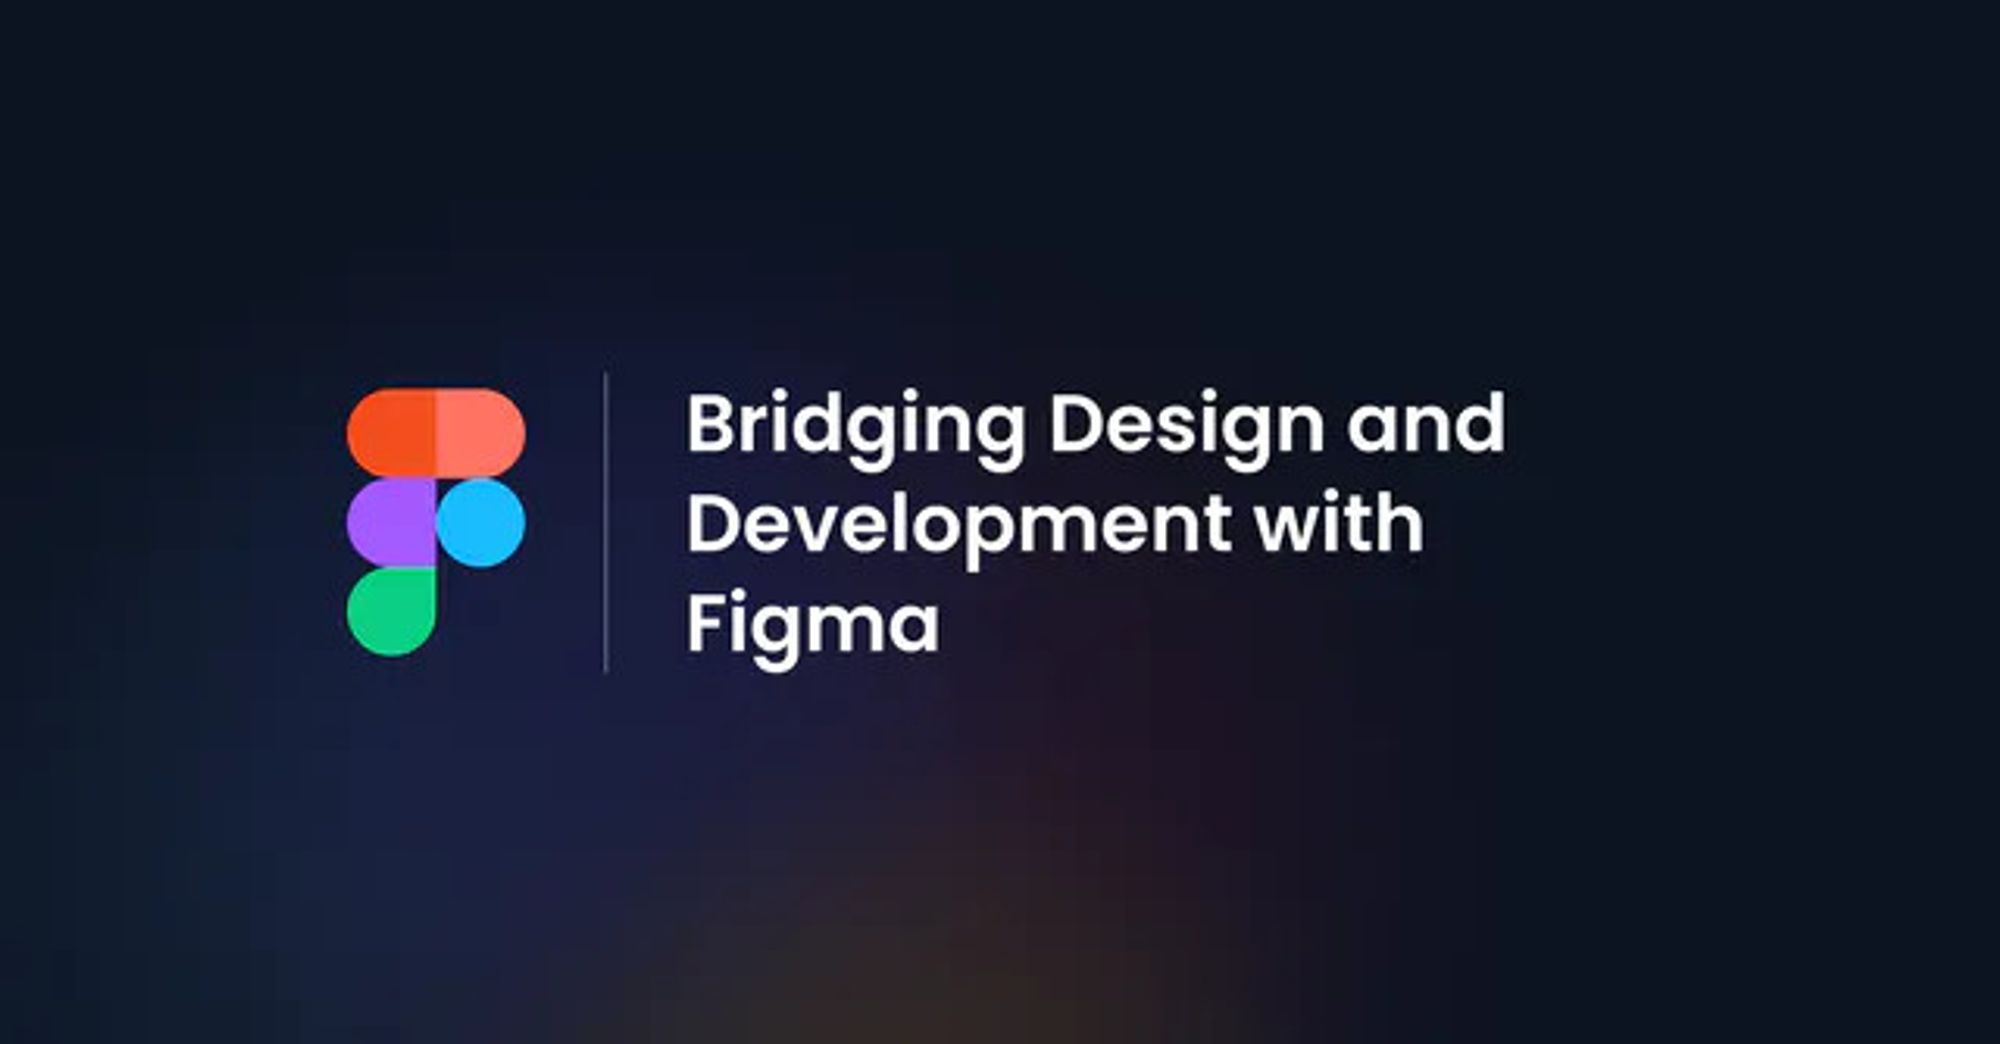 Bridging Design and Development with Figma